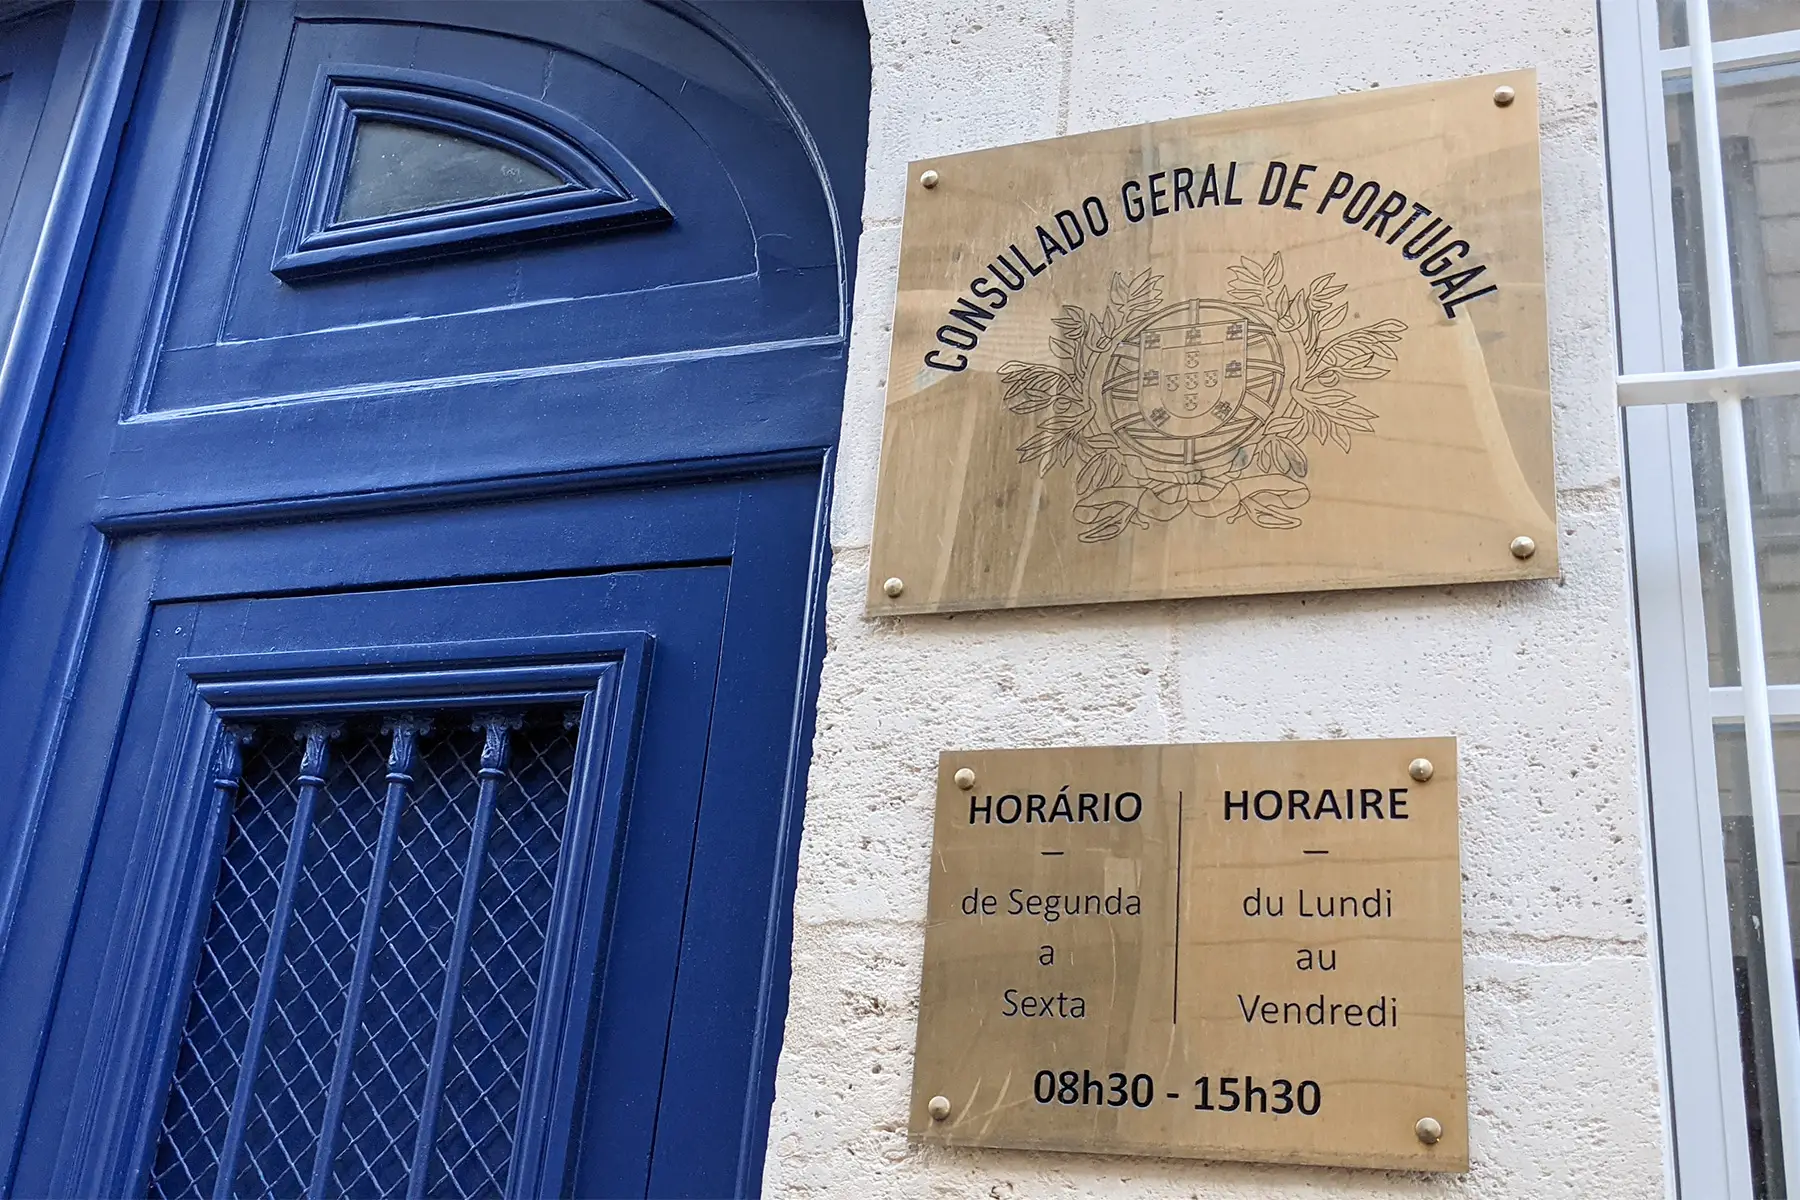 the Portuguese Consulate in Bordeaux, France